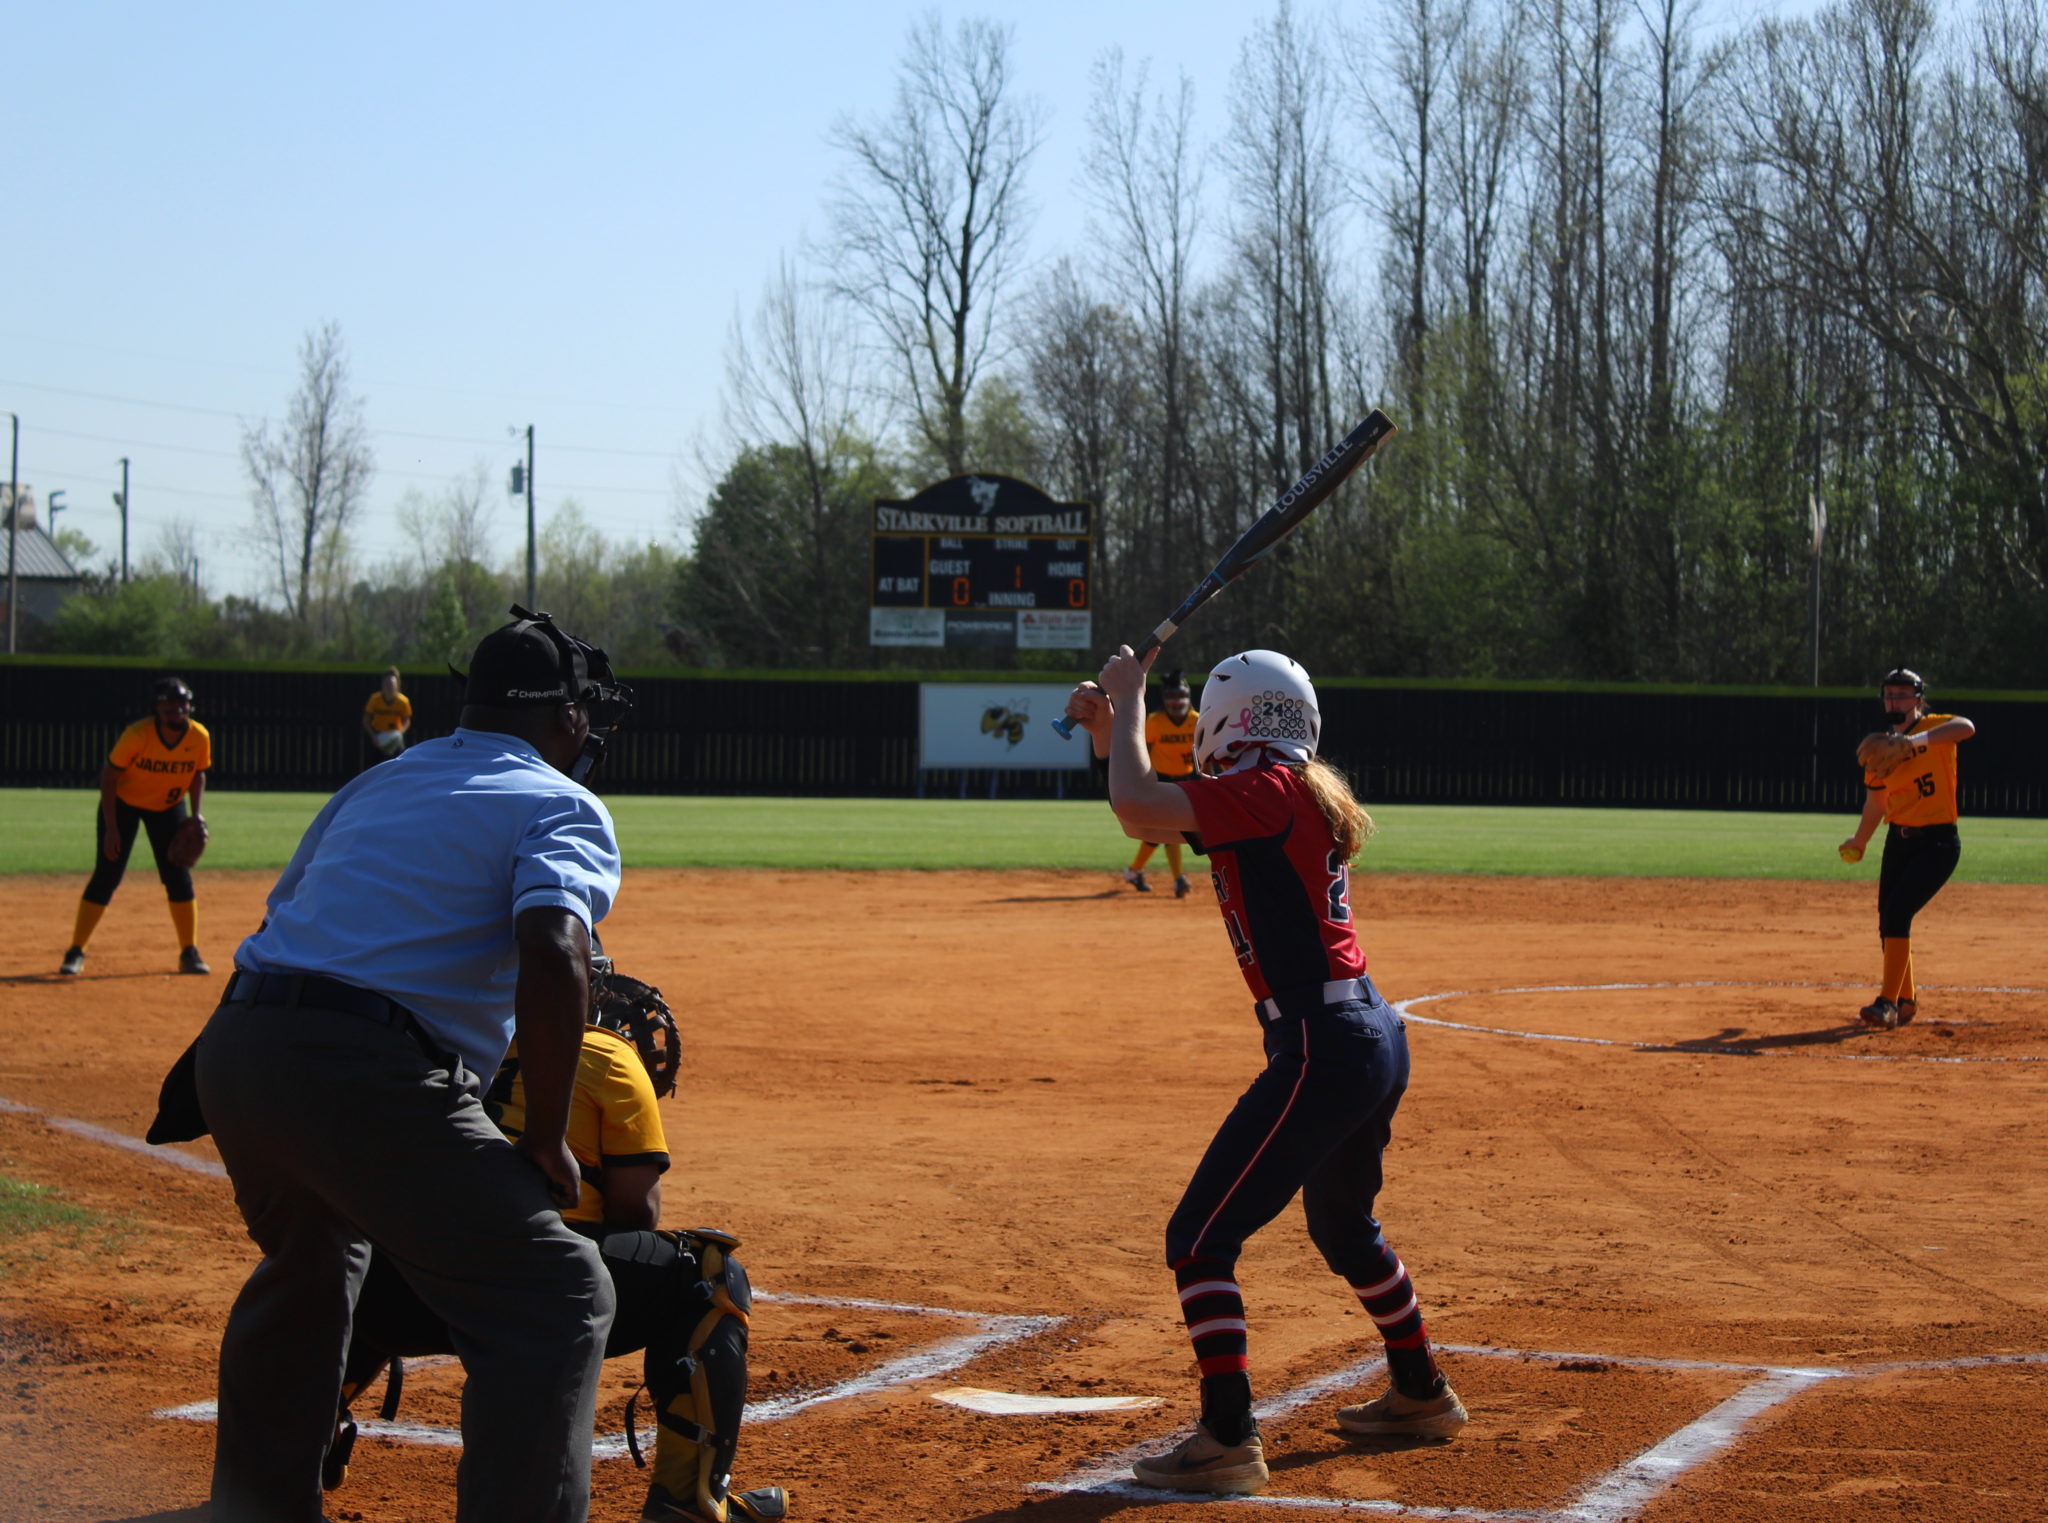 Starkville softball shut out by South Panola as Tigers pitcher tosses